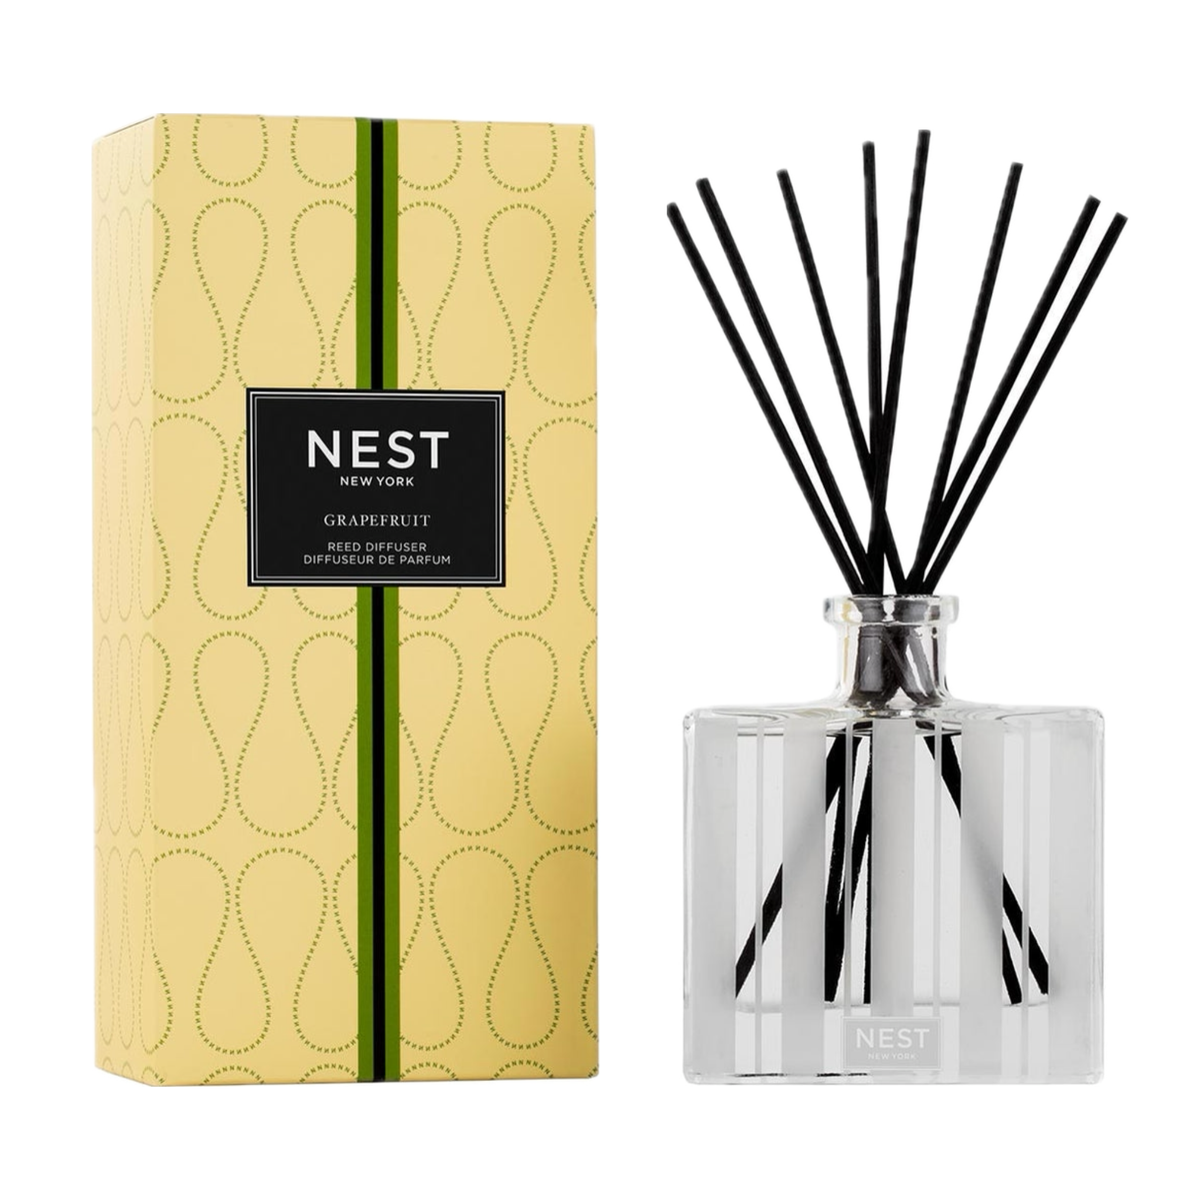 Product Image of Nest New York’s Grapefruit Reed Diffuser with Box